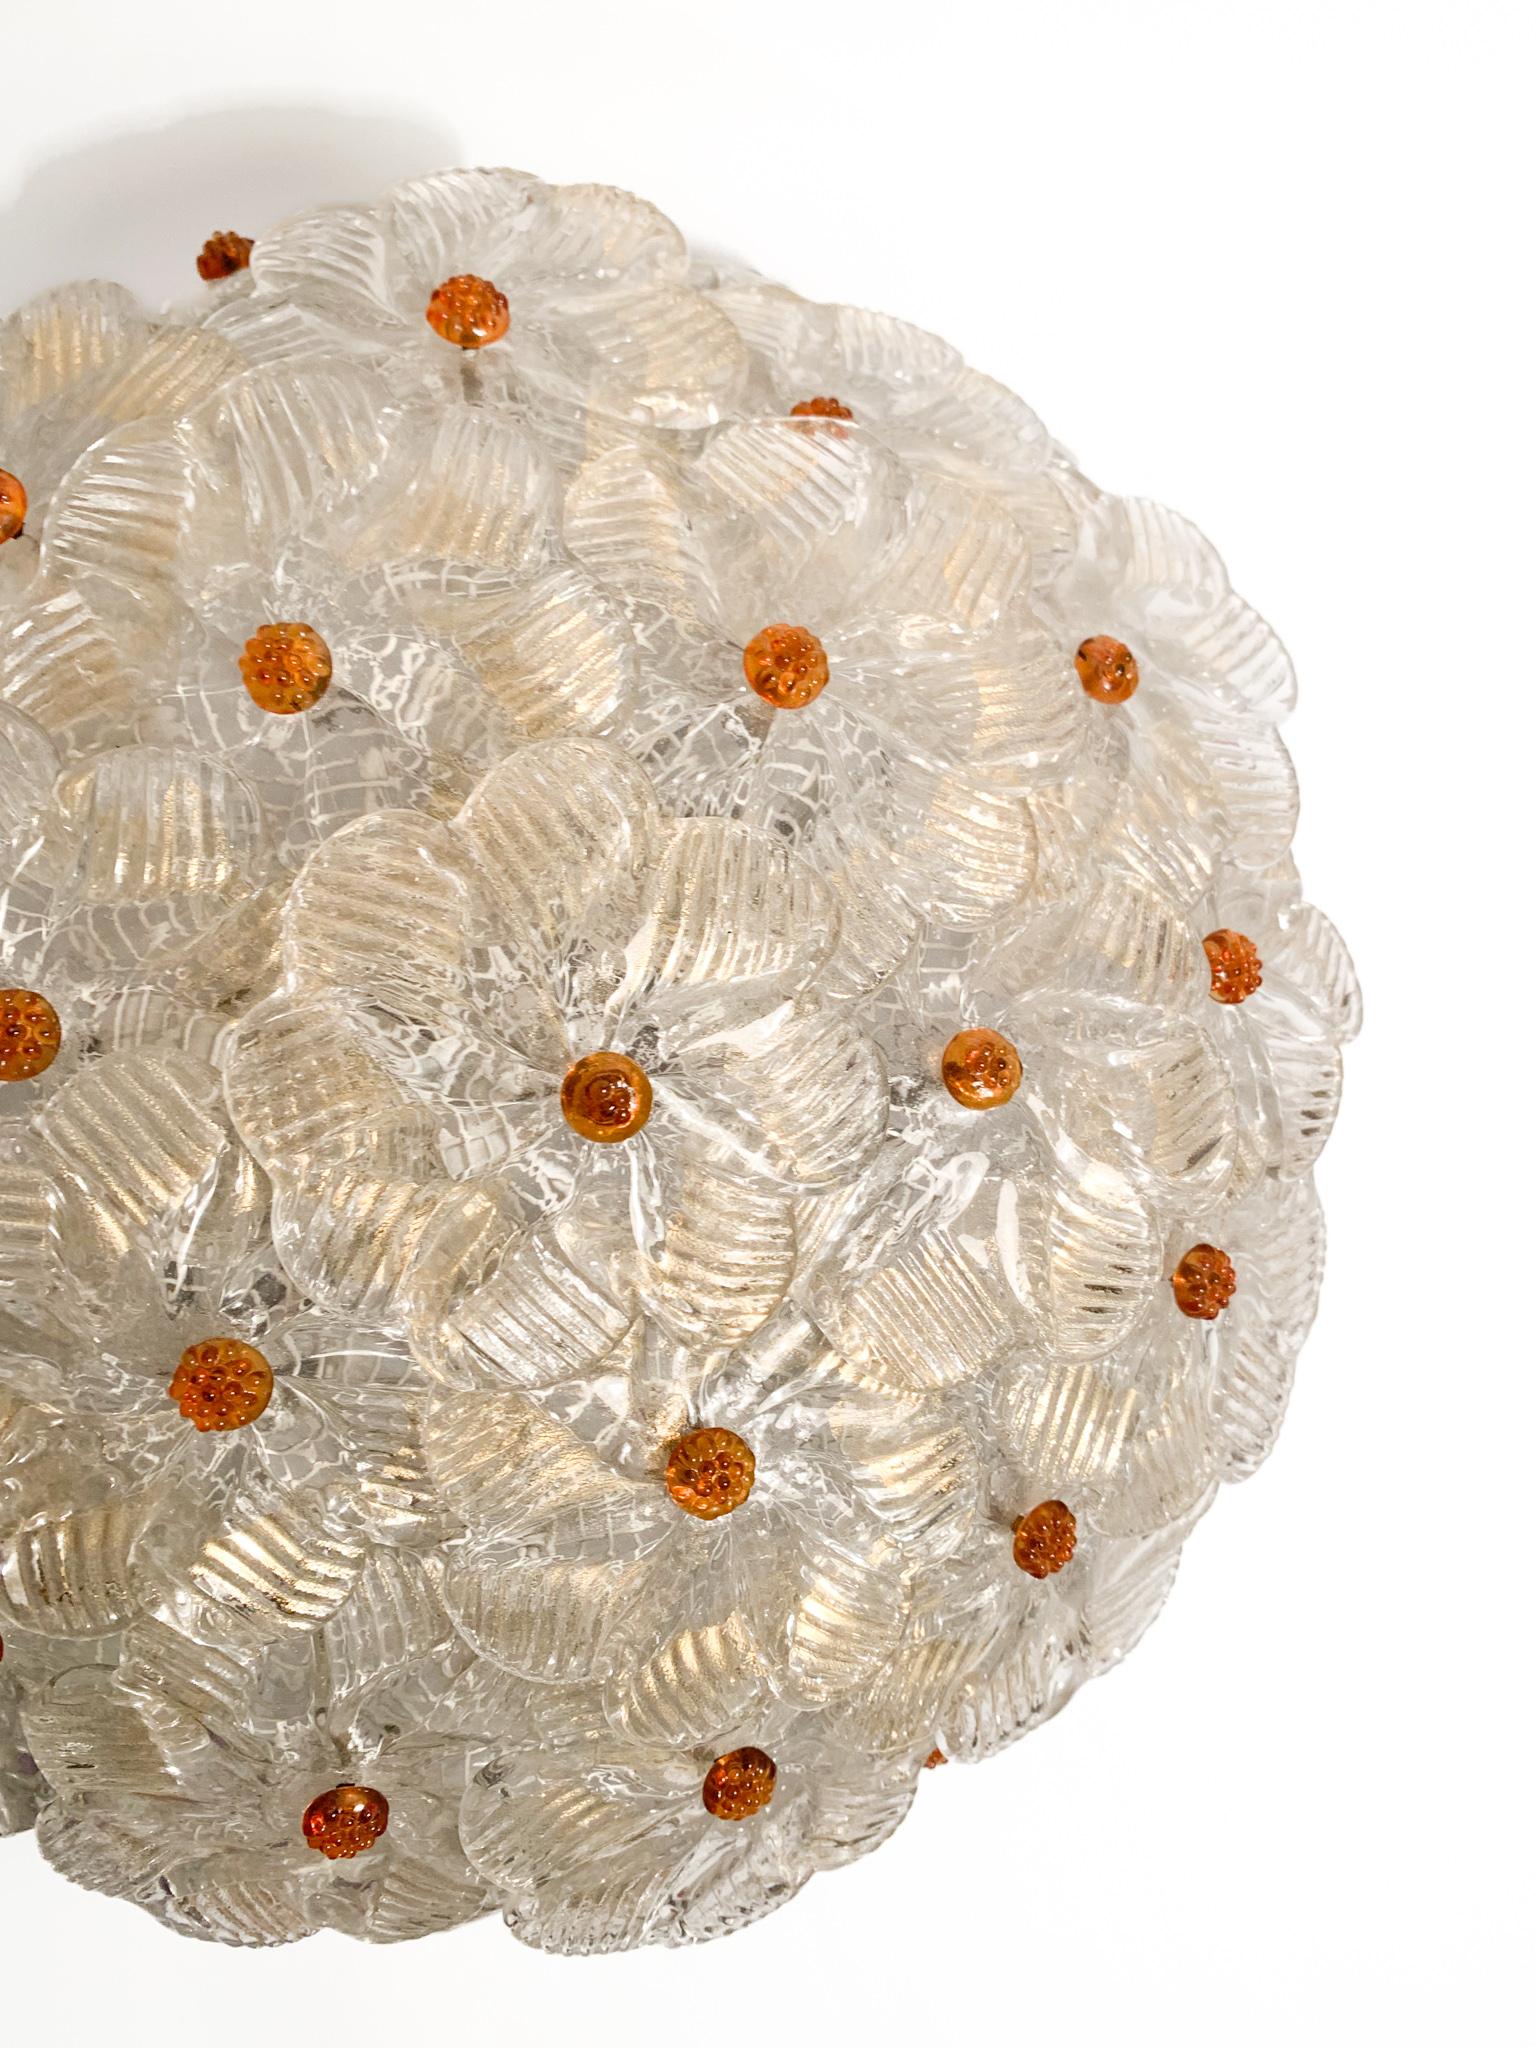 Mid-Century Modern Millefiori Ceiling Light by Barovier & Toso in Murano Glass from the 1950s